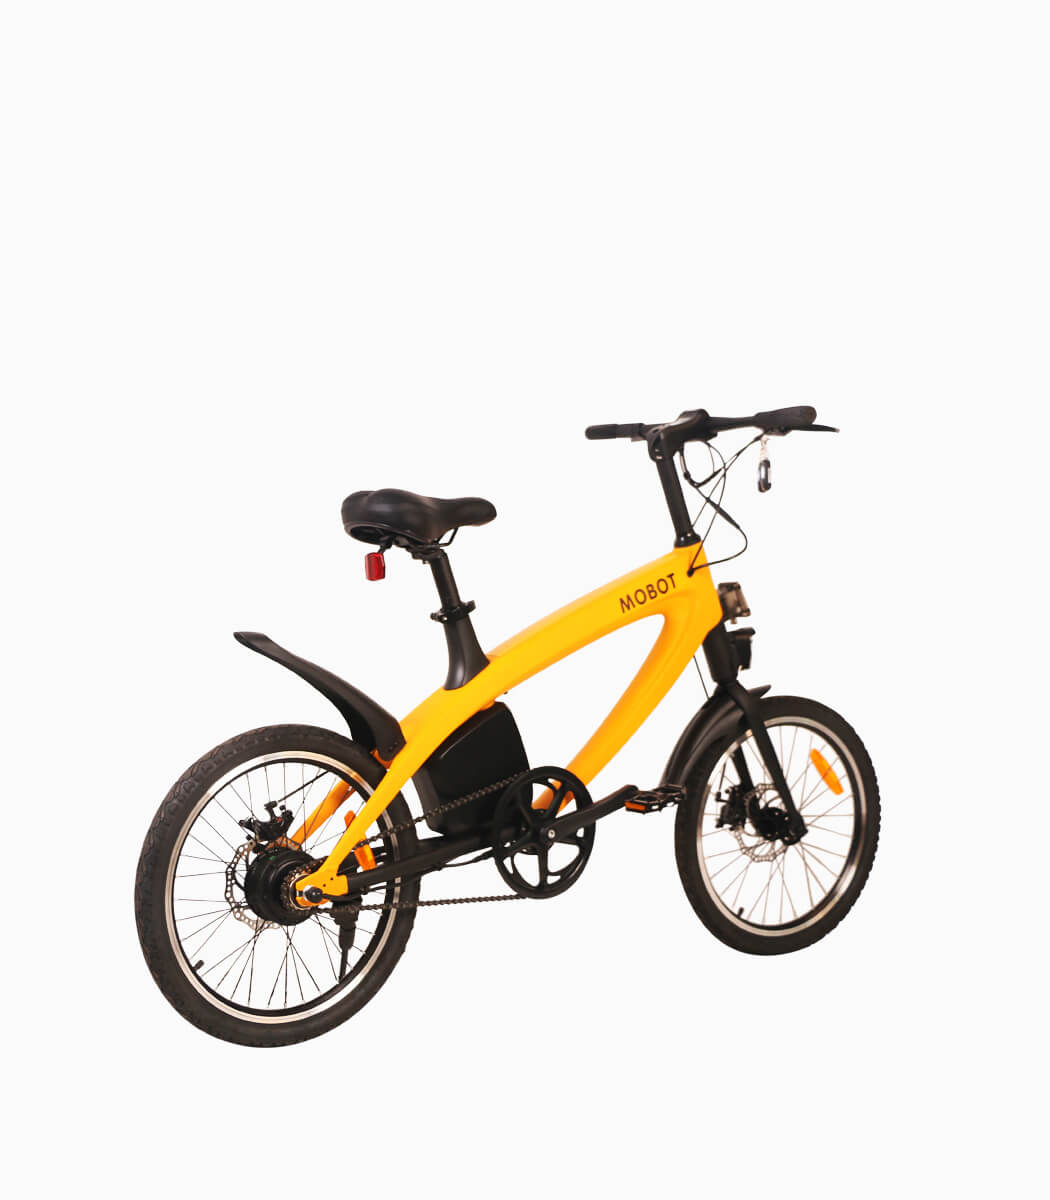 MOBOT OVO (ORANGE) LTA approved electric bicycle rear angled right